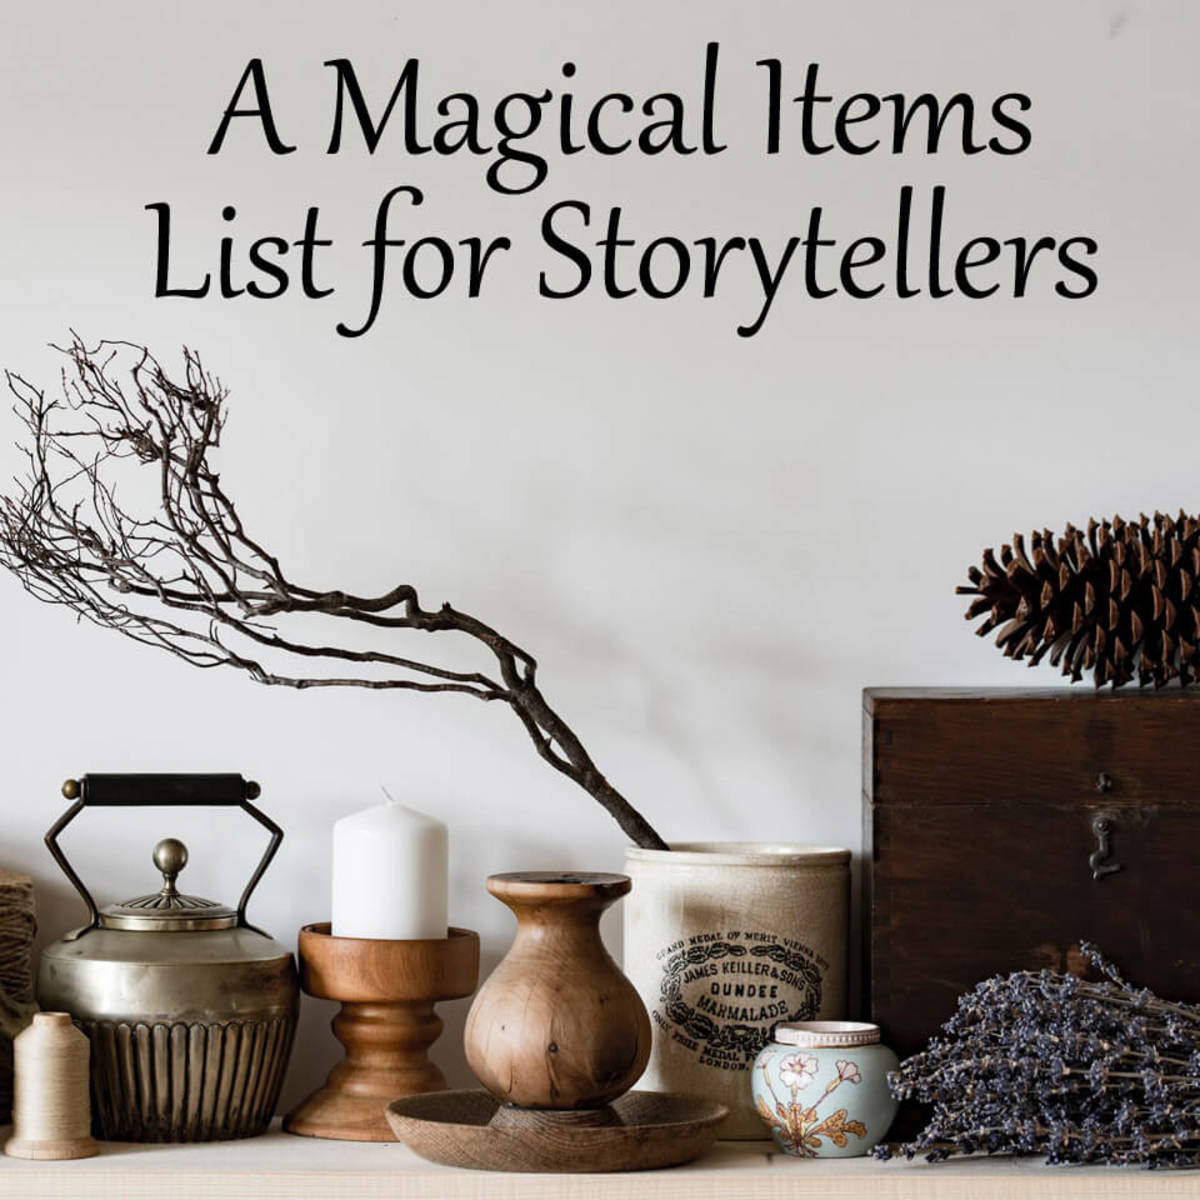 A Magical Items List for Storytellers